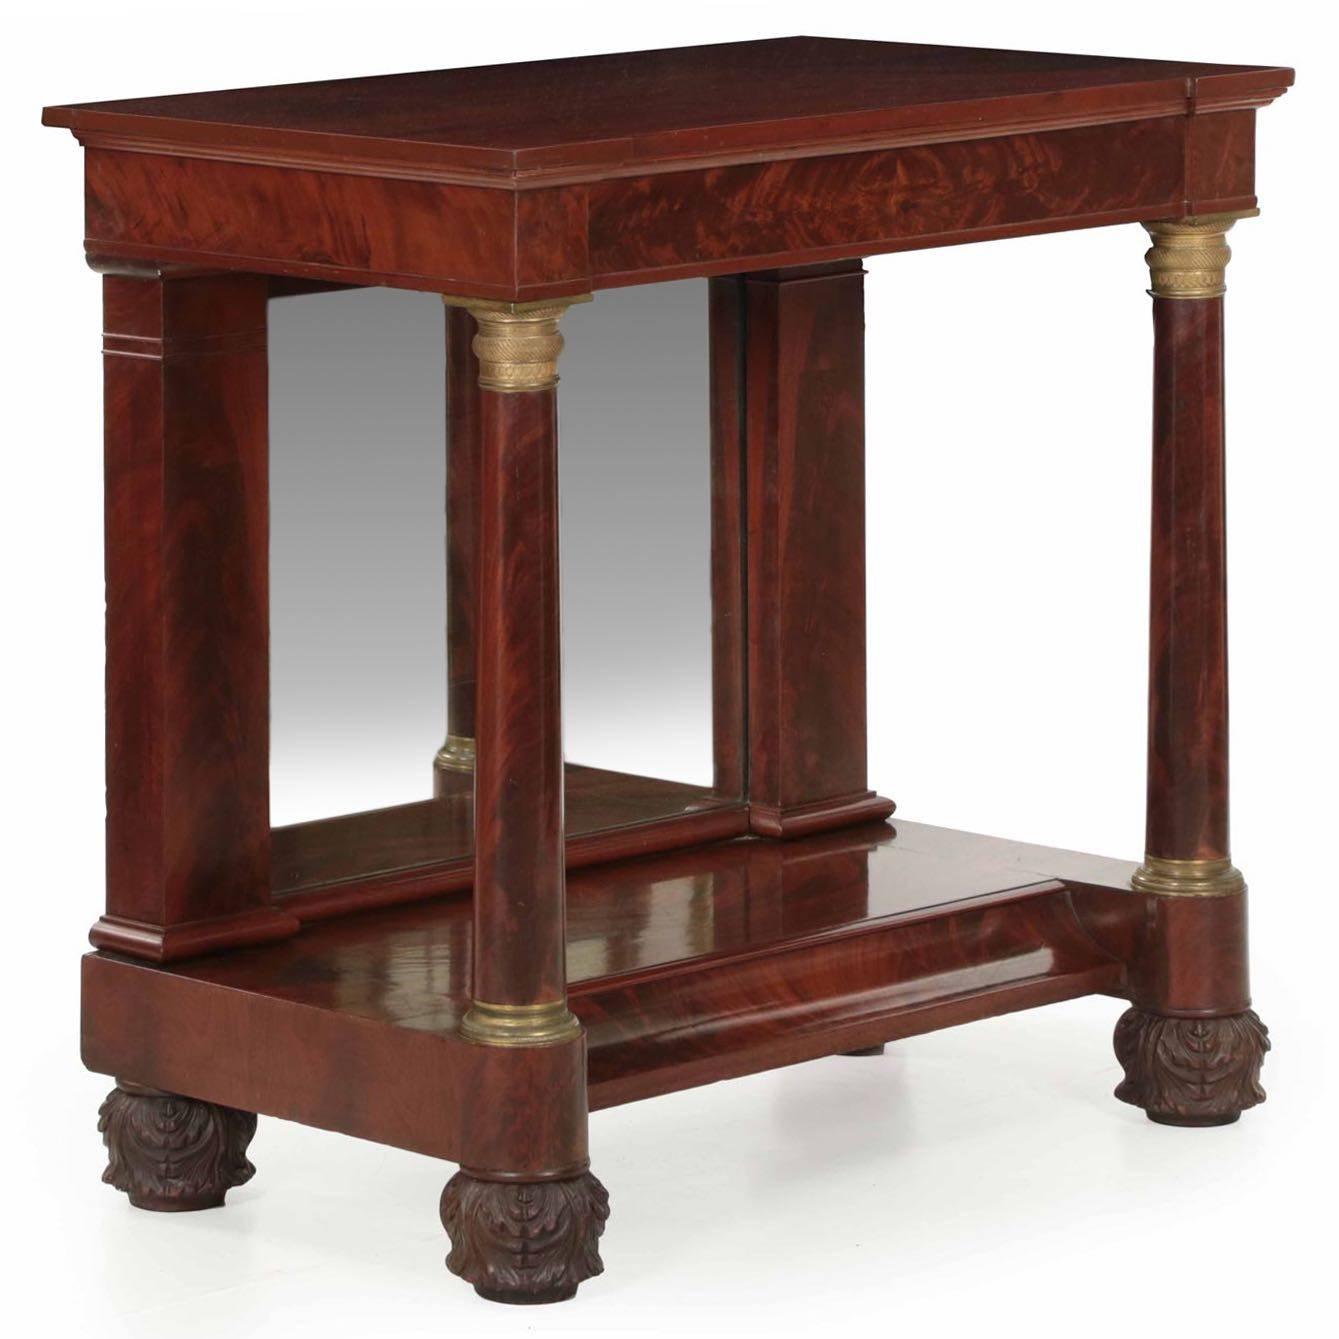 Using excellent selections of matched grain mahogany veneers in the apron and stretcher, the craftsman that reconstructed this piece was quite effective at lightening what is generally a heavy form. The pier table is crafted of period elements,